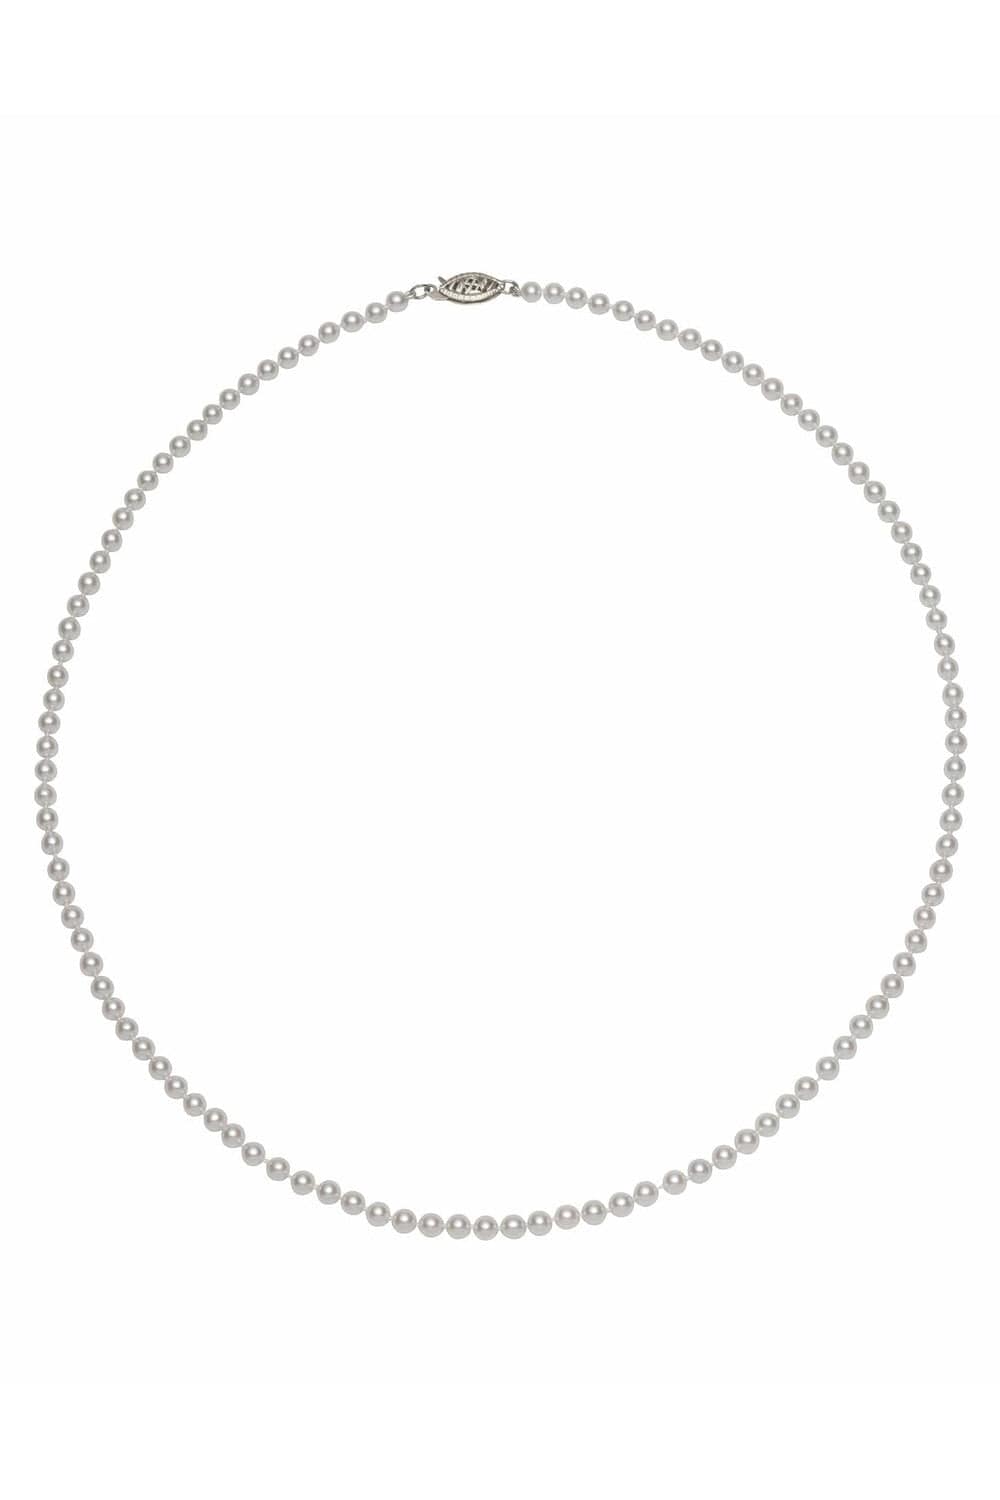 BAGGINS-Akoya Pearl Necklace - 4mm - White Gold-WHITE GOLD